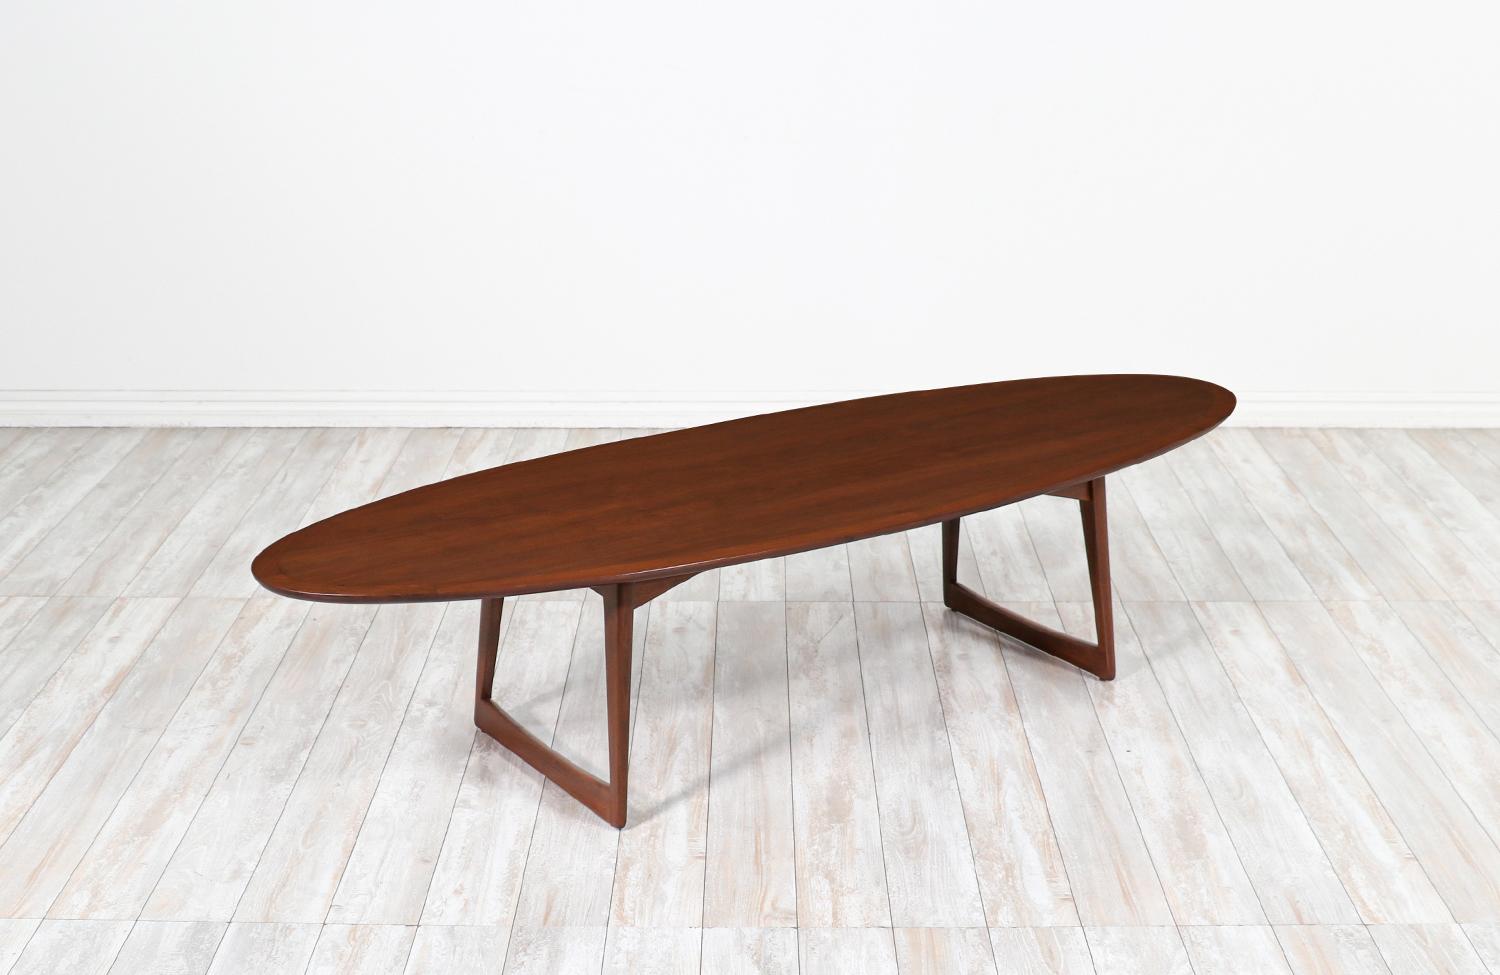 Elegant surfboard style coffee table imported from Denmark by Moreddi circa 1950s. This fantastic design has been meticulously crafted in walnut wood and supported by a sled style and slightly angled sculptural legs. The tabletop shows a richly warm